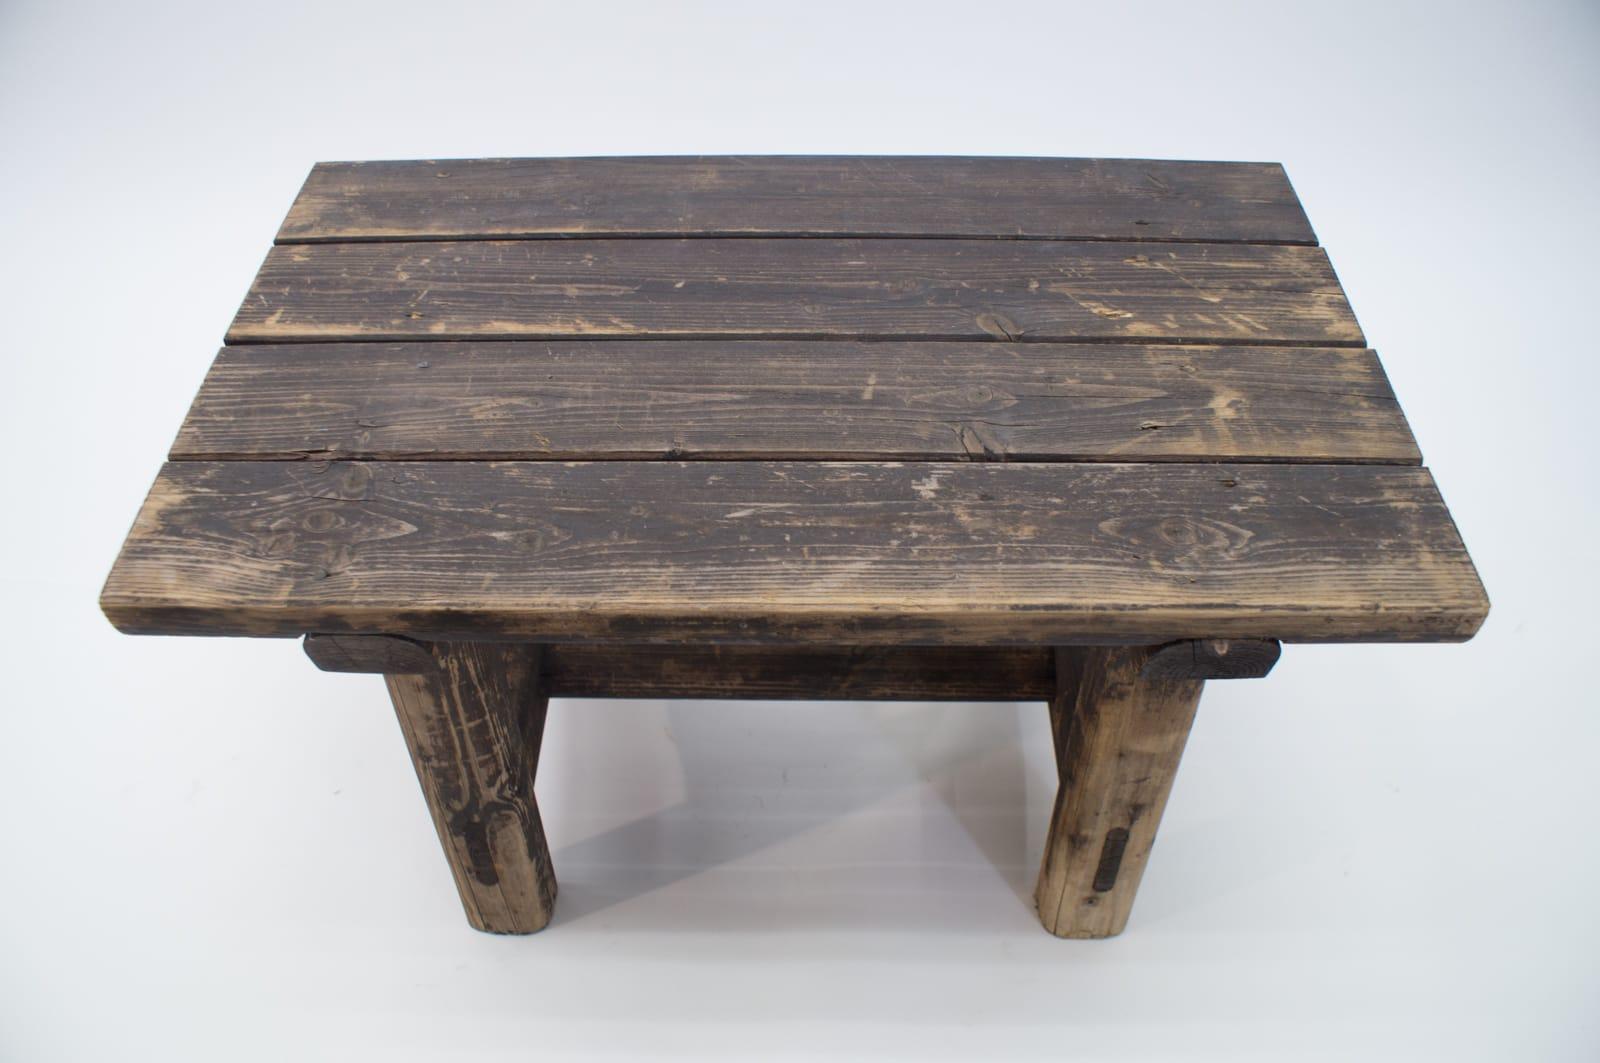 Black Forest Wooden Bench, 1930s-1940s, Germany 2